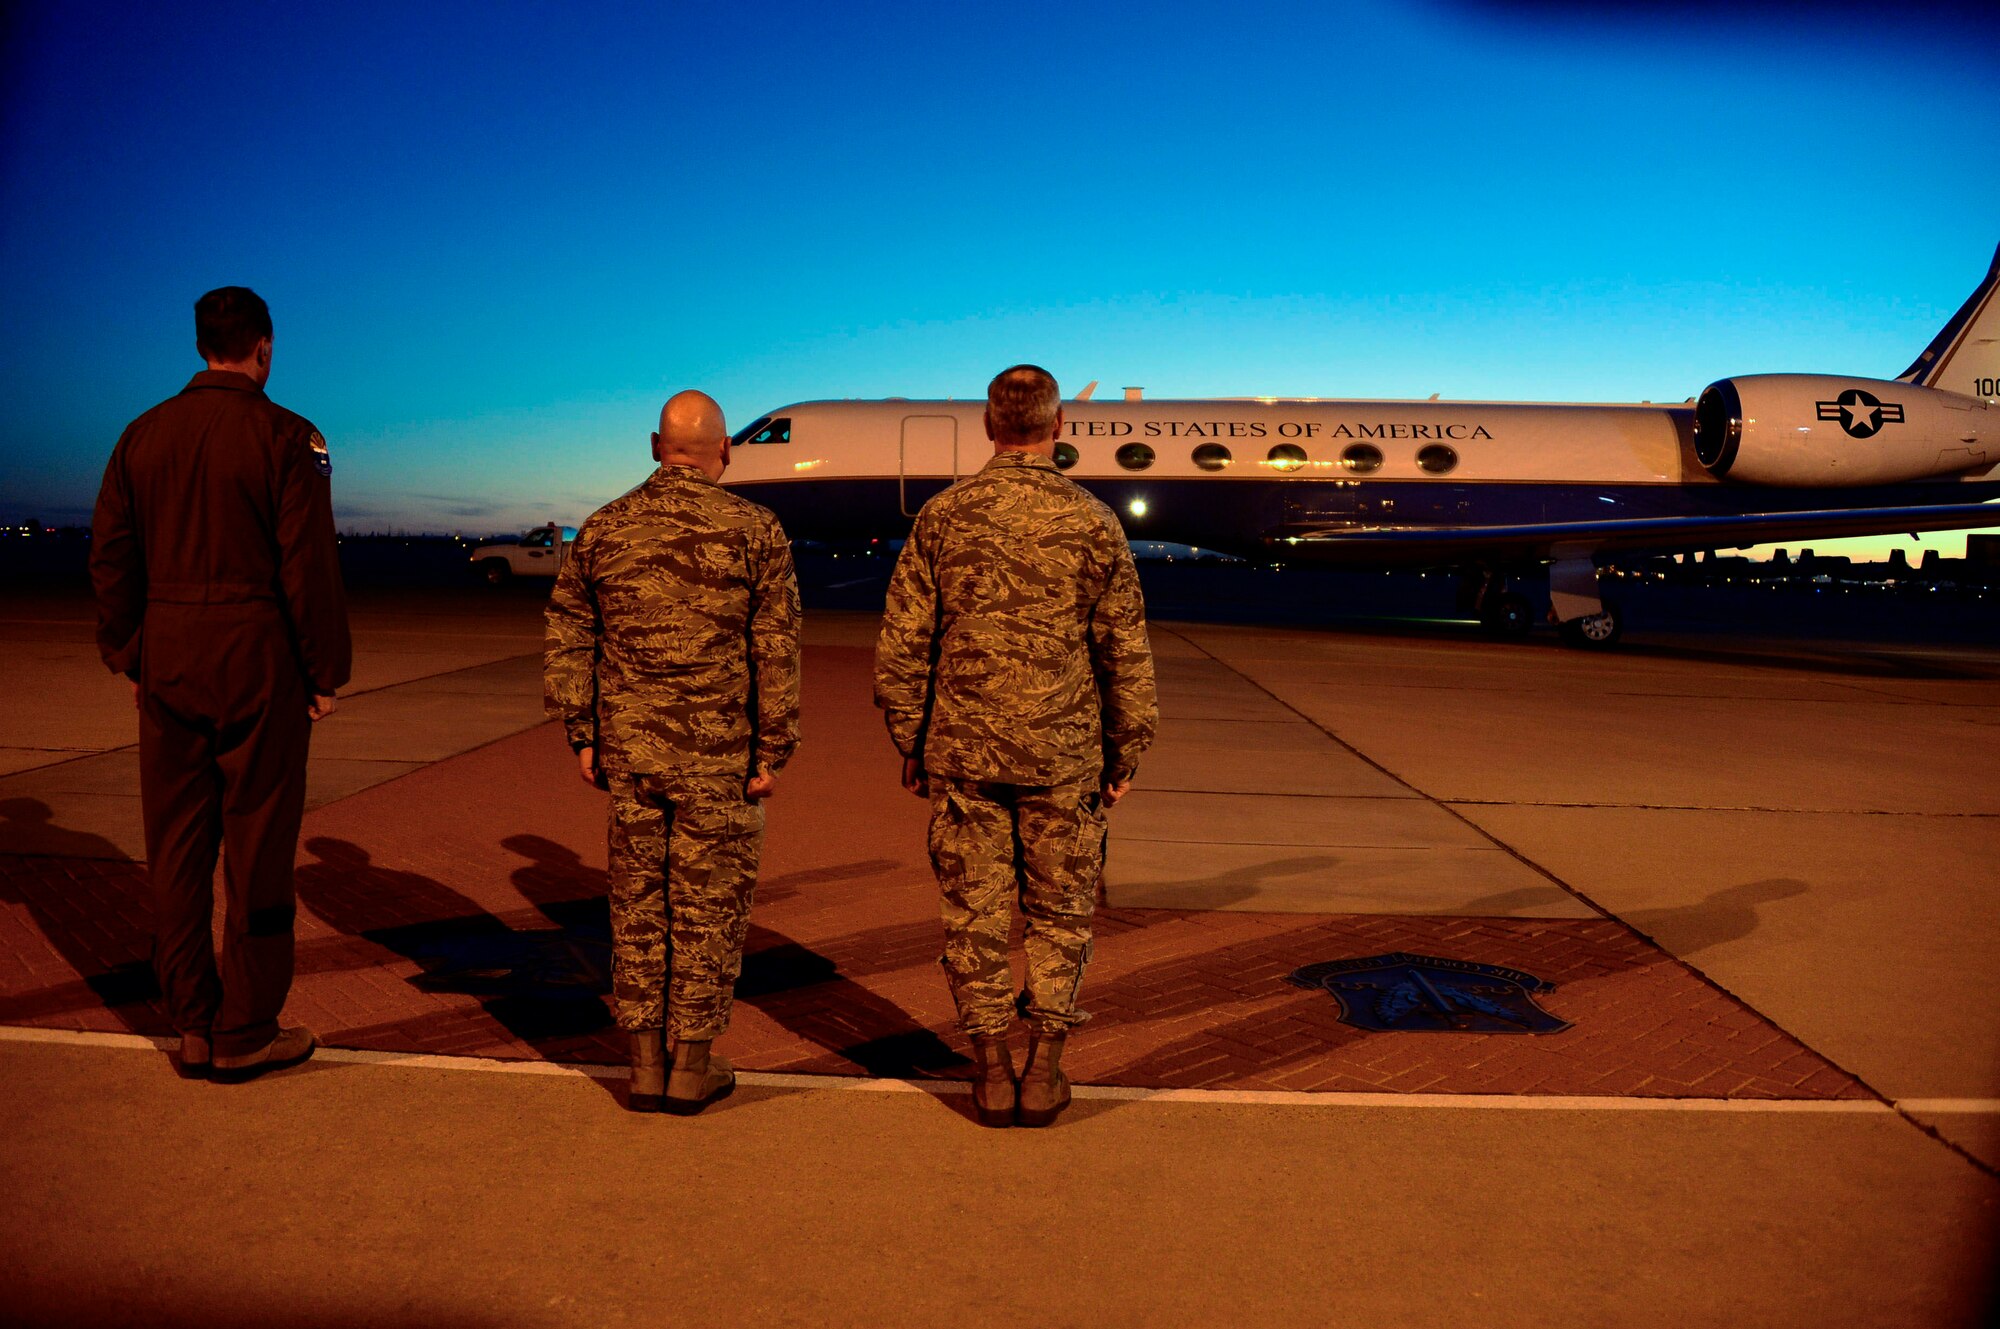 U.S. Air Force, Col. James Meger, 355th Fighter Wing commander, U.S. Air Force Chief Master Sgt. Jose Barraza, 12th Air Force (Air Forces Southern) command chief, and U.S. Air Force Lt. Gen. Chris Nowland, 12th AF (AFSOUTH) commander, prepare for the arrival of U.S. Navy Adm. Kurt Tidd, U.S. Southern Command commander, and U.S. Army Command Sgt. Maj. William Zaiser, U.S. SOUTHCOM senior enlisted leader, at Davis-Monthan AFB, Ariz., Feb. 22, 2016.  Tidd assumed command of U.S. SOUTHCOM on Jan. 14, 2016 and is familiarizing himself with the various component services that make up a combatant command.  U.S. SOUTHCOM is responsible for all Department of Defense security cooperation in the 45 nations and territories of Central and South America and the Caribbean.  AFSOUTH is the air component to U.S. SOUTHCOM responsible for U.S. air and space operations throughout U.S. SOUTHCOM’s area of responsibility. (U.S. Air Force photo by Tech. Sgt. Heather R. Redman/Released)